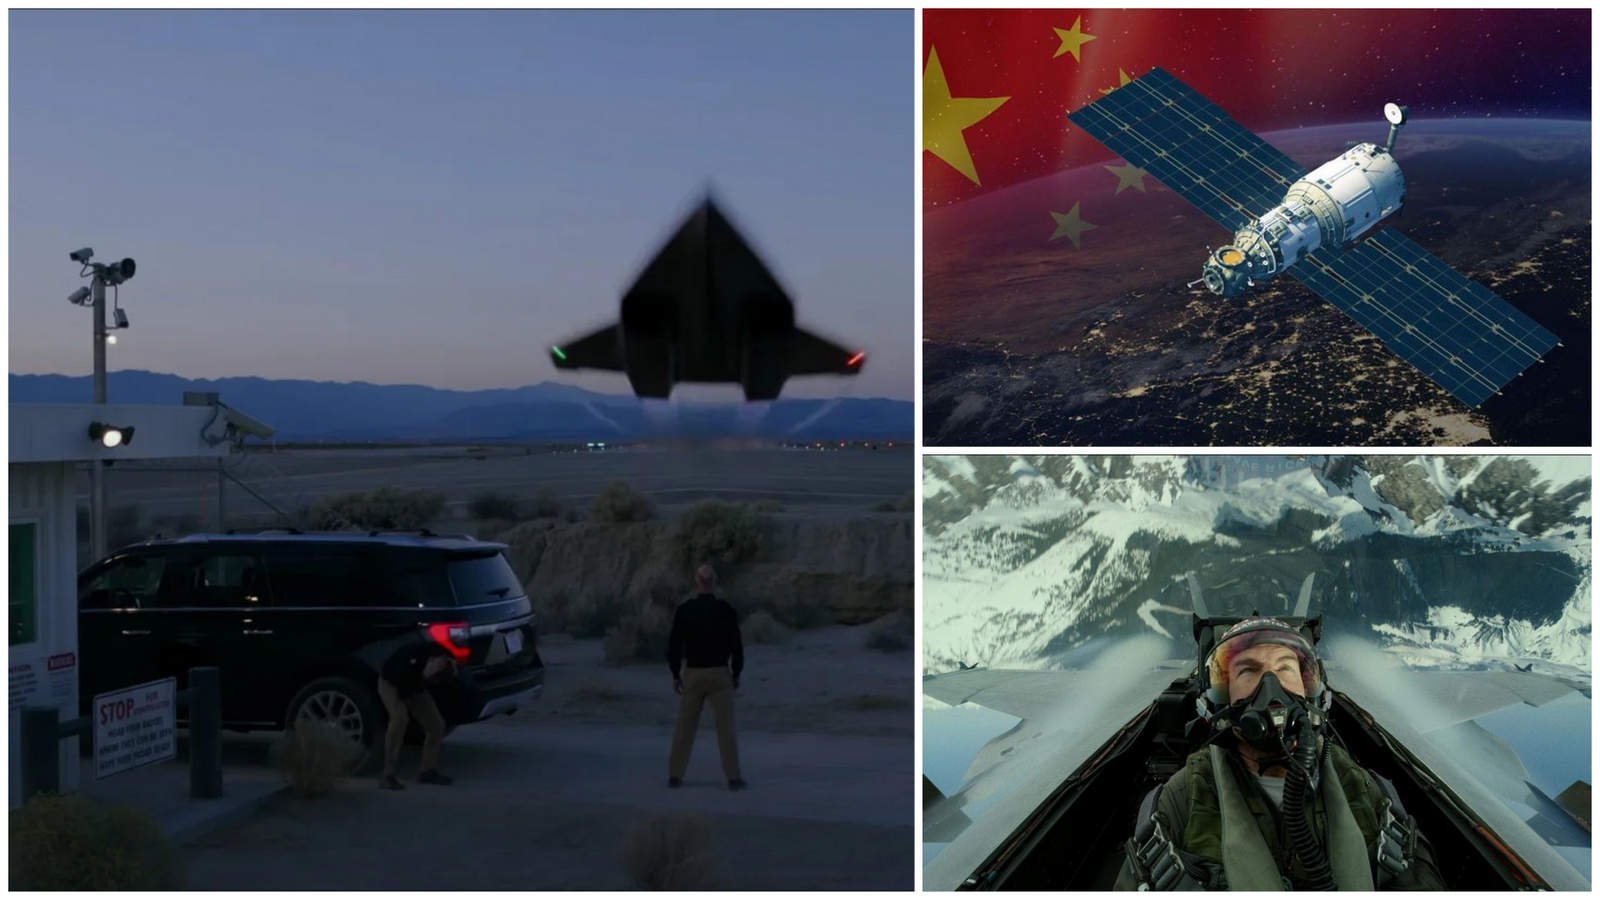 Tom Cruise's hypersonic jet scared China so much that it used its spy satellite